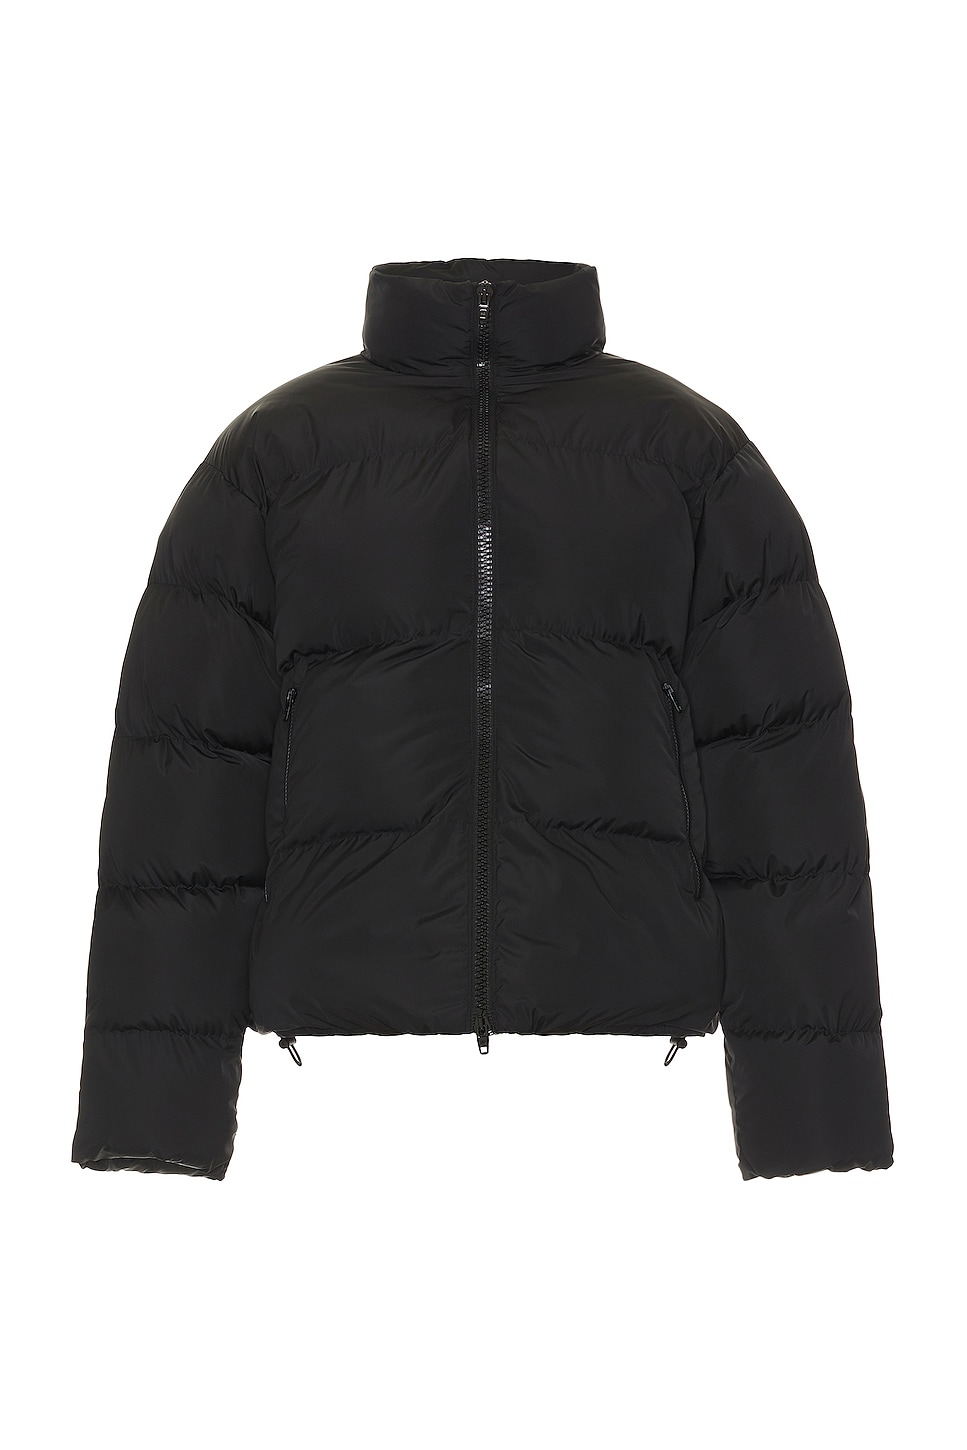 Image 1 of Balenciaga Inflatable Puffer Jacket in Black